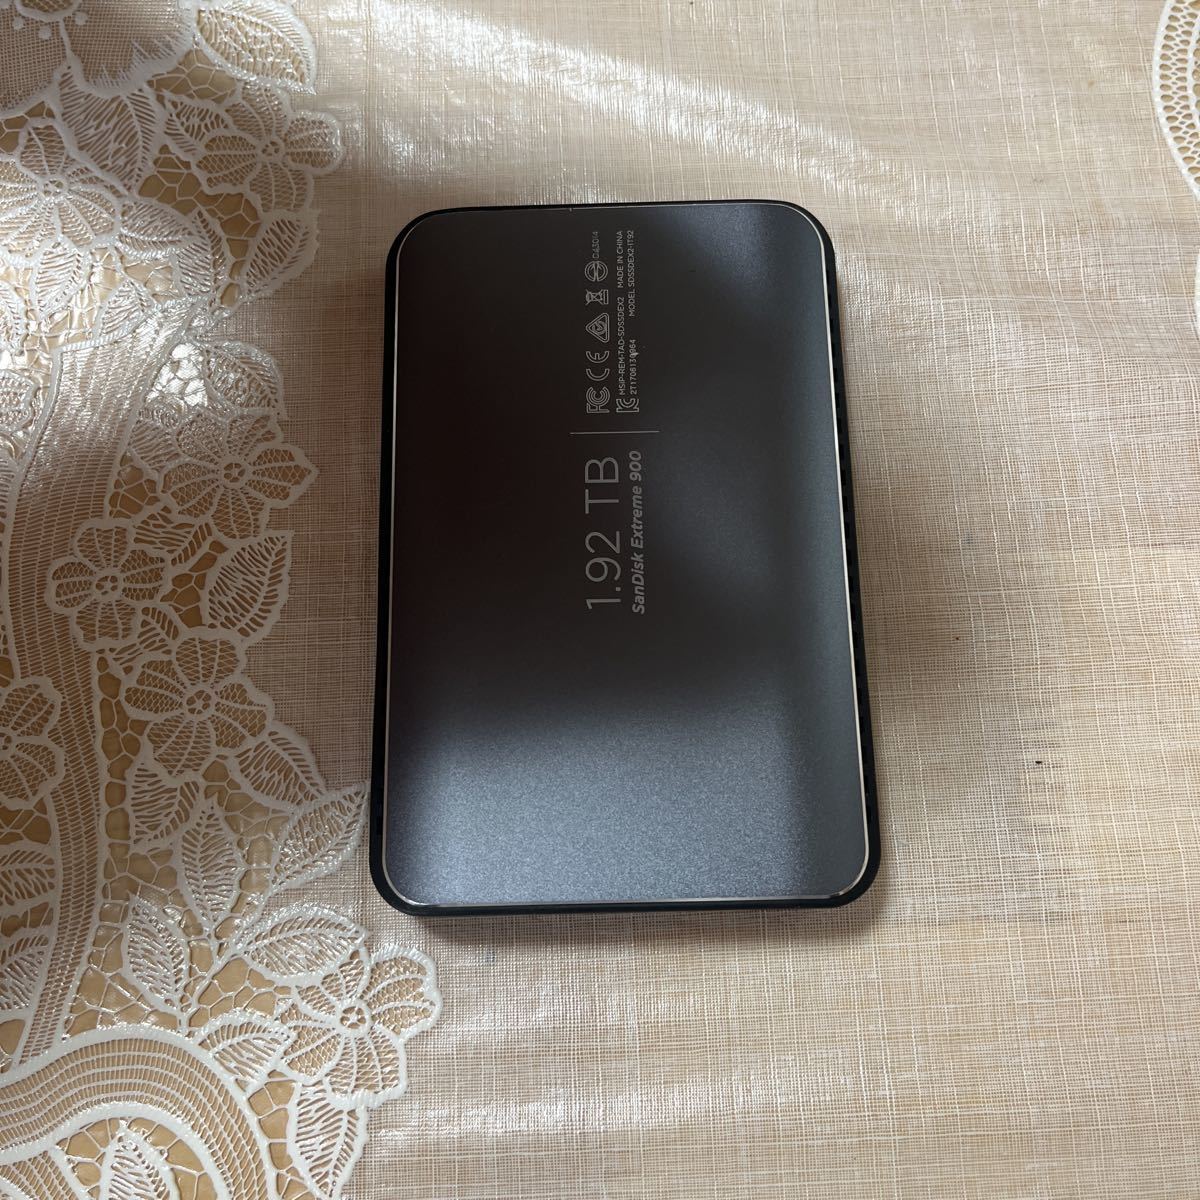 SanDisk EXTREME900 SSD 1.92TB portable 